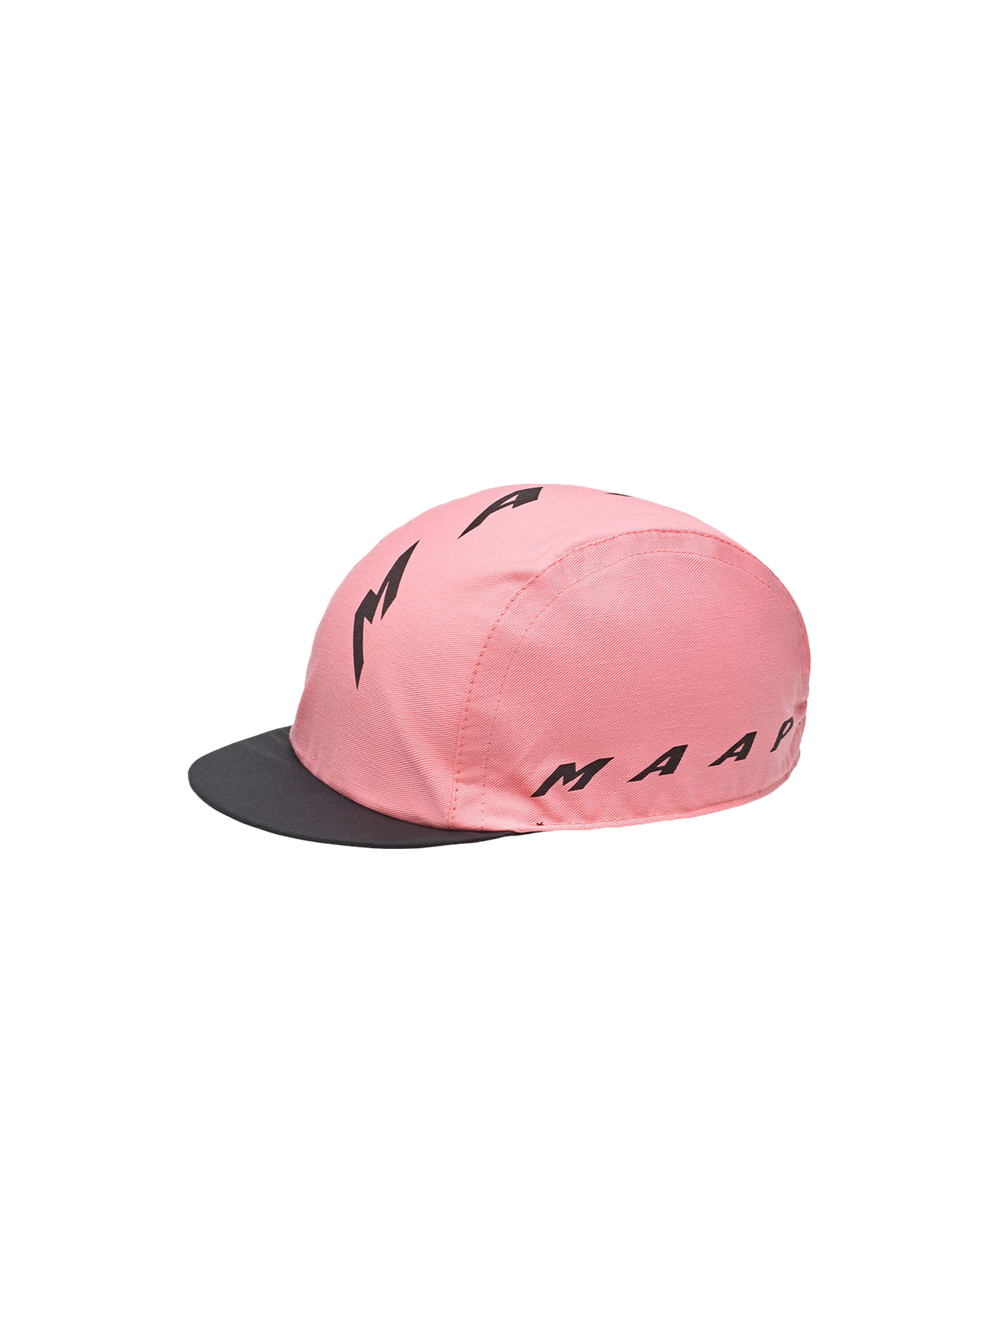 Product Image for Evade Cap